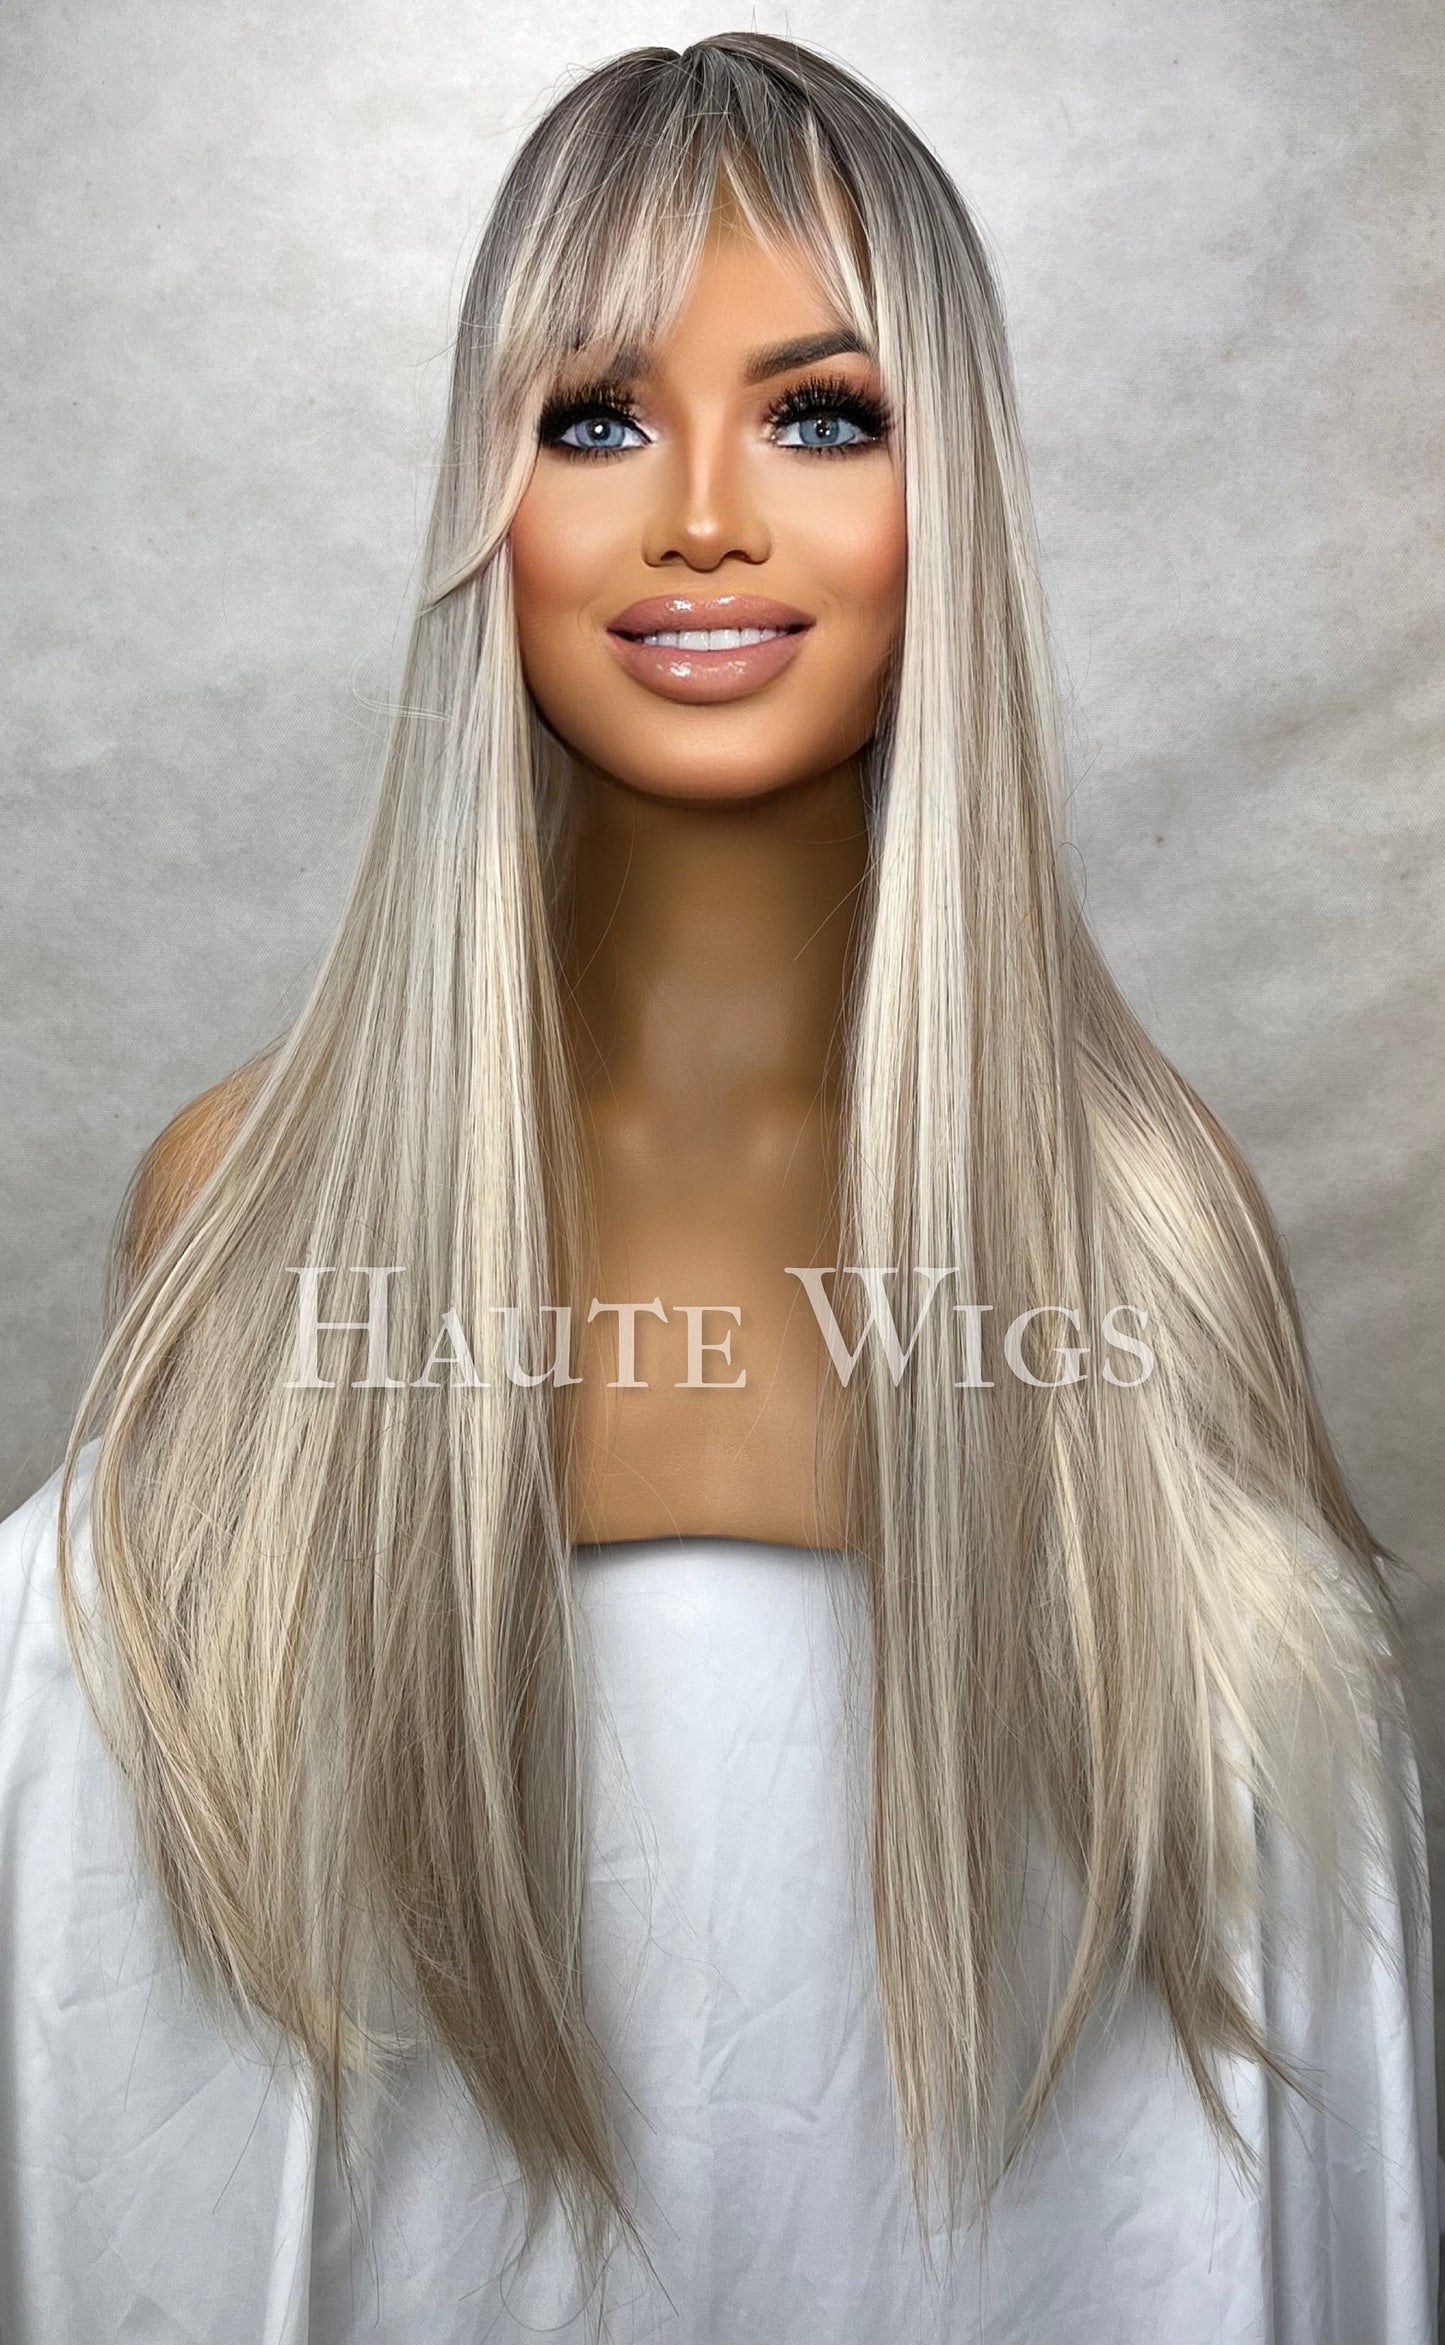 Crystal - Blonde With Dark Brown Roots Balayage Highlights 20 Inch Wig Straight Layered NO Lace Front bangs Wig Gift for her